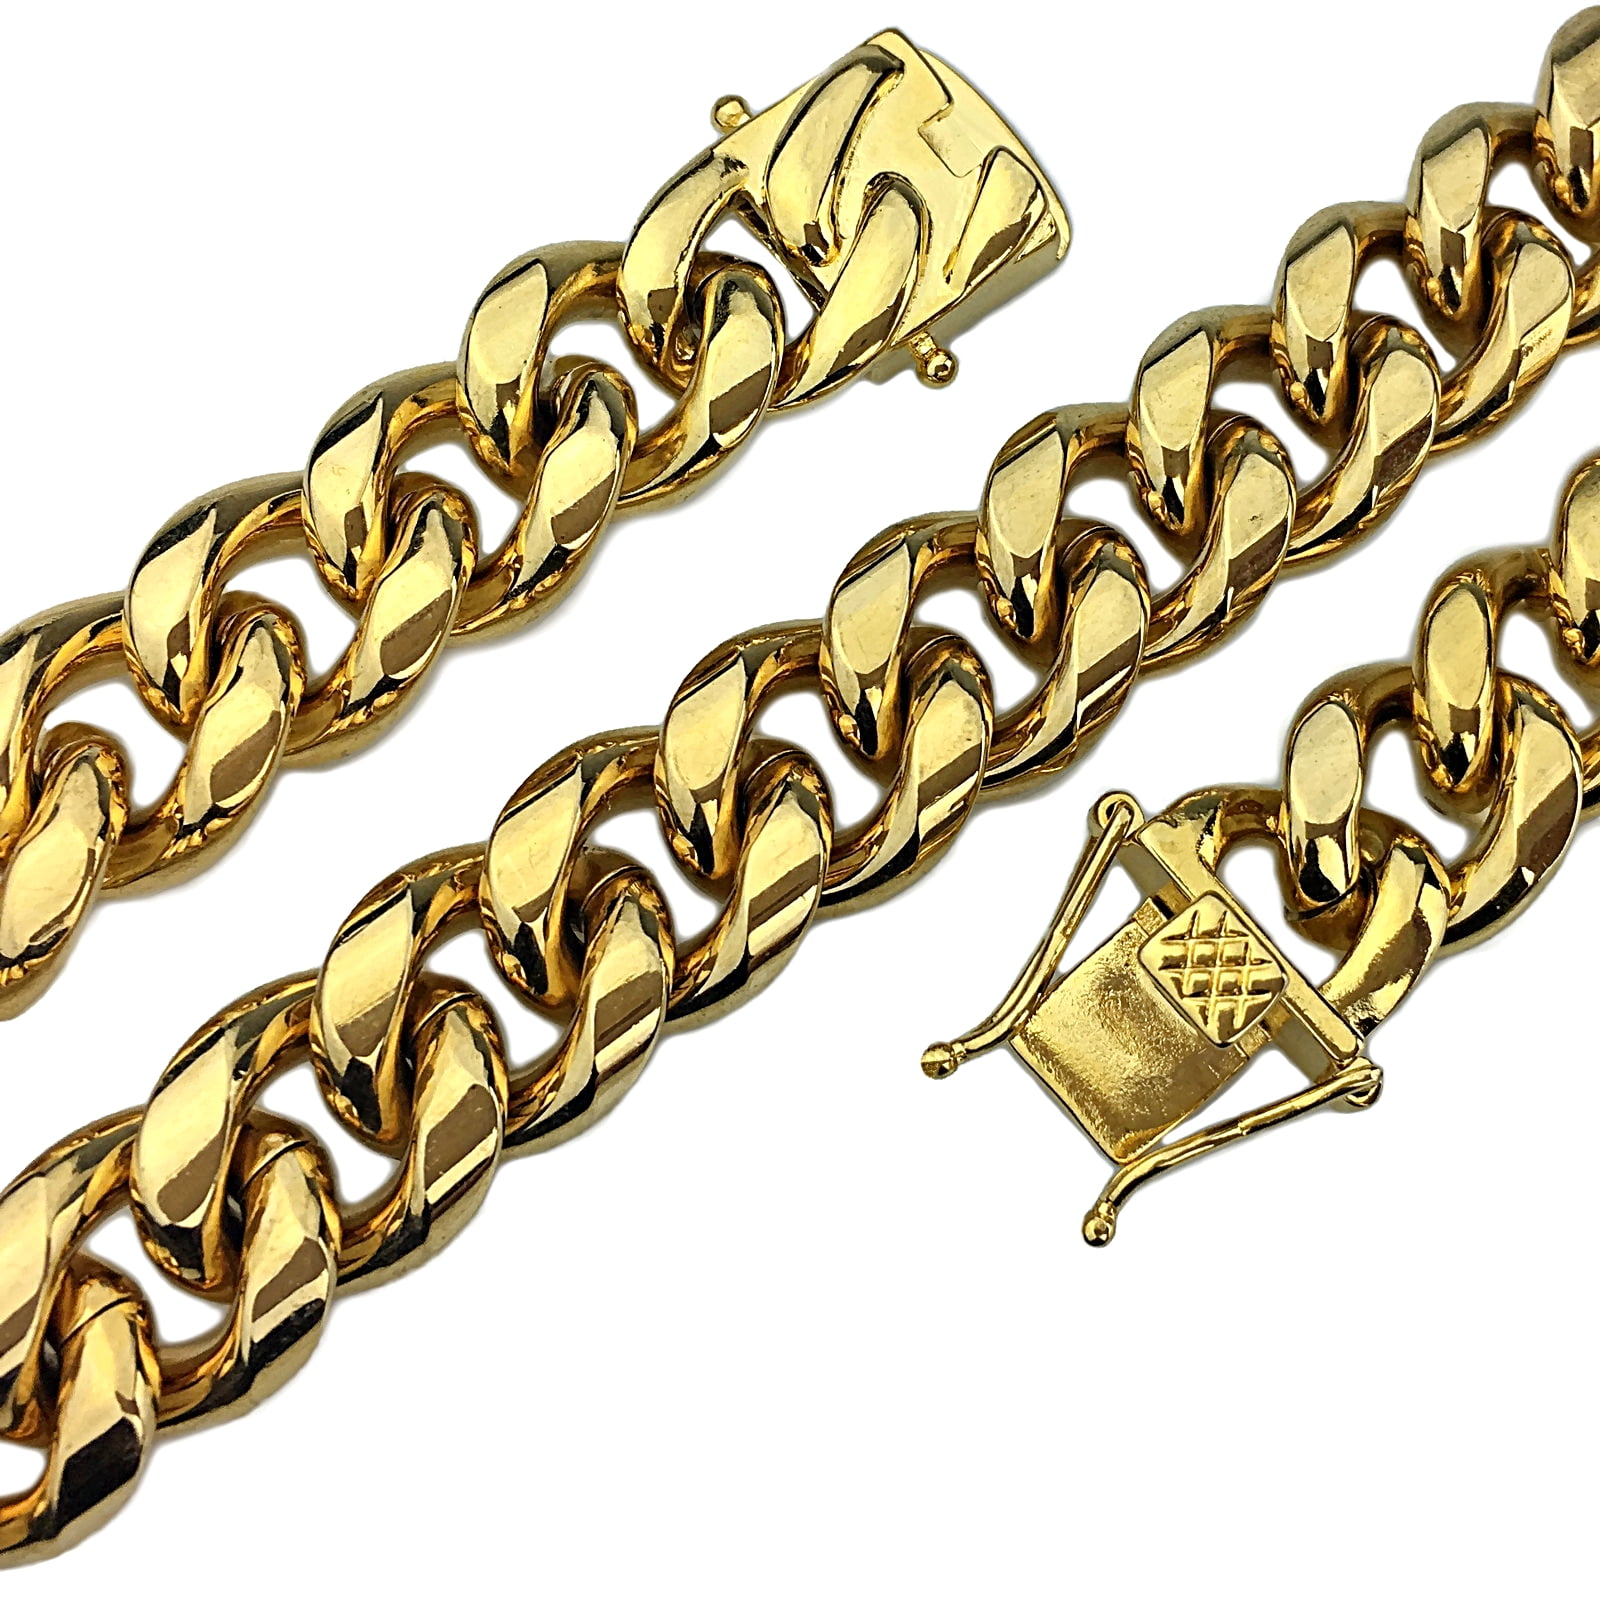 Hot~ Men's Heavy Solid Stainless Chunky Bracelet Cuban Curb Link Chain Gold 14mm 